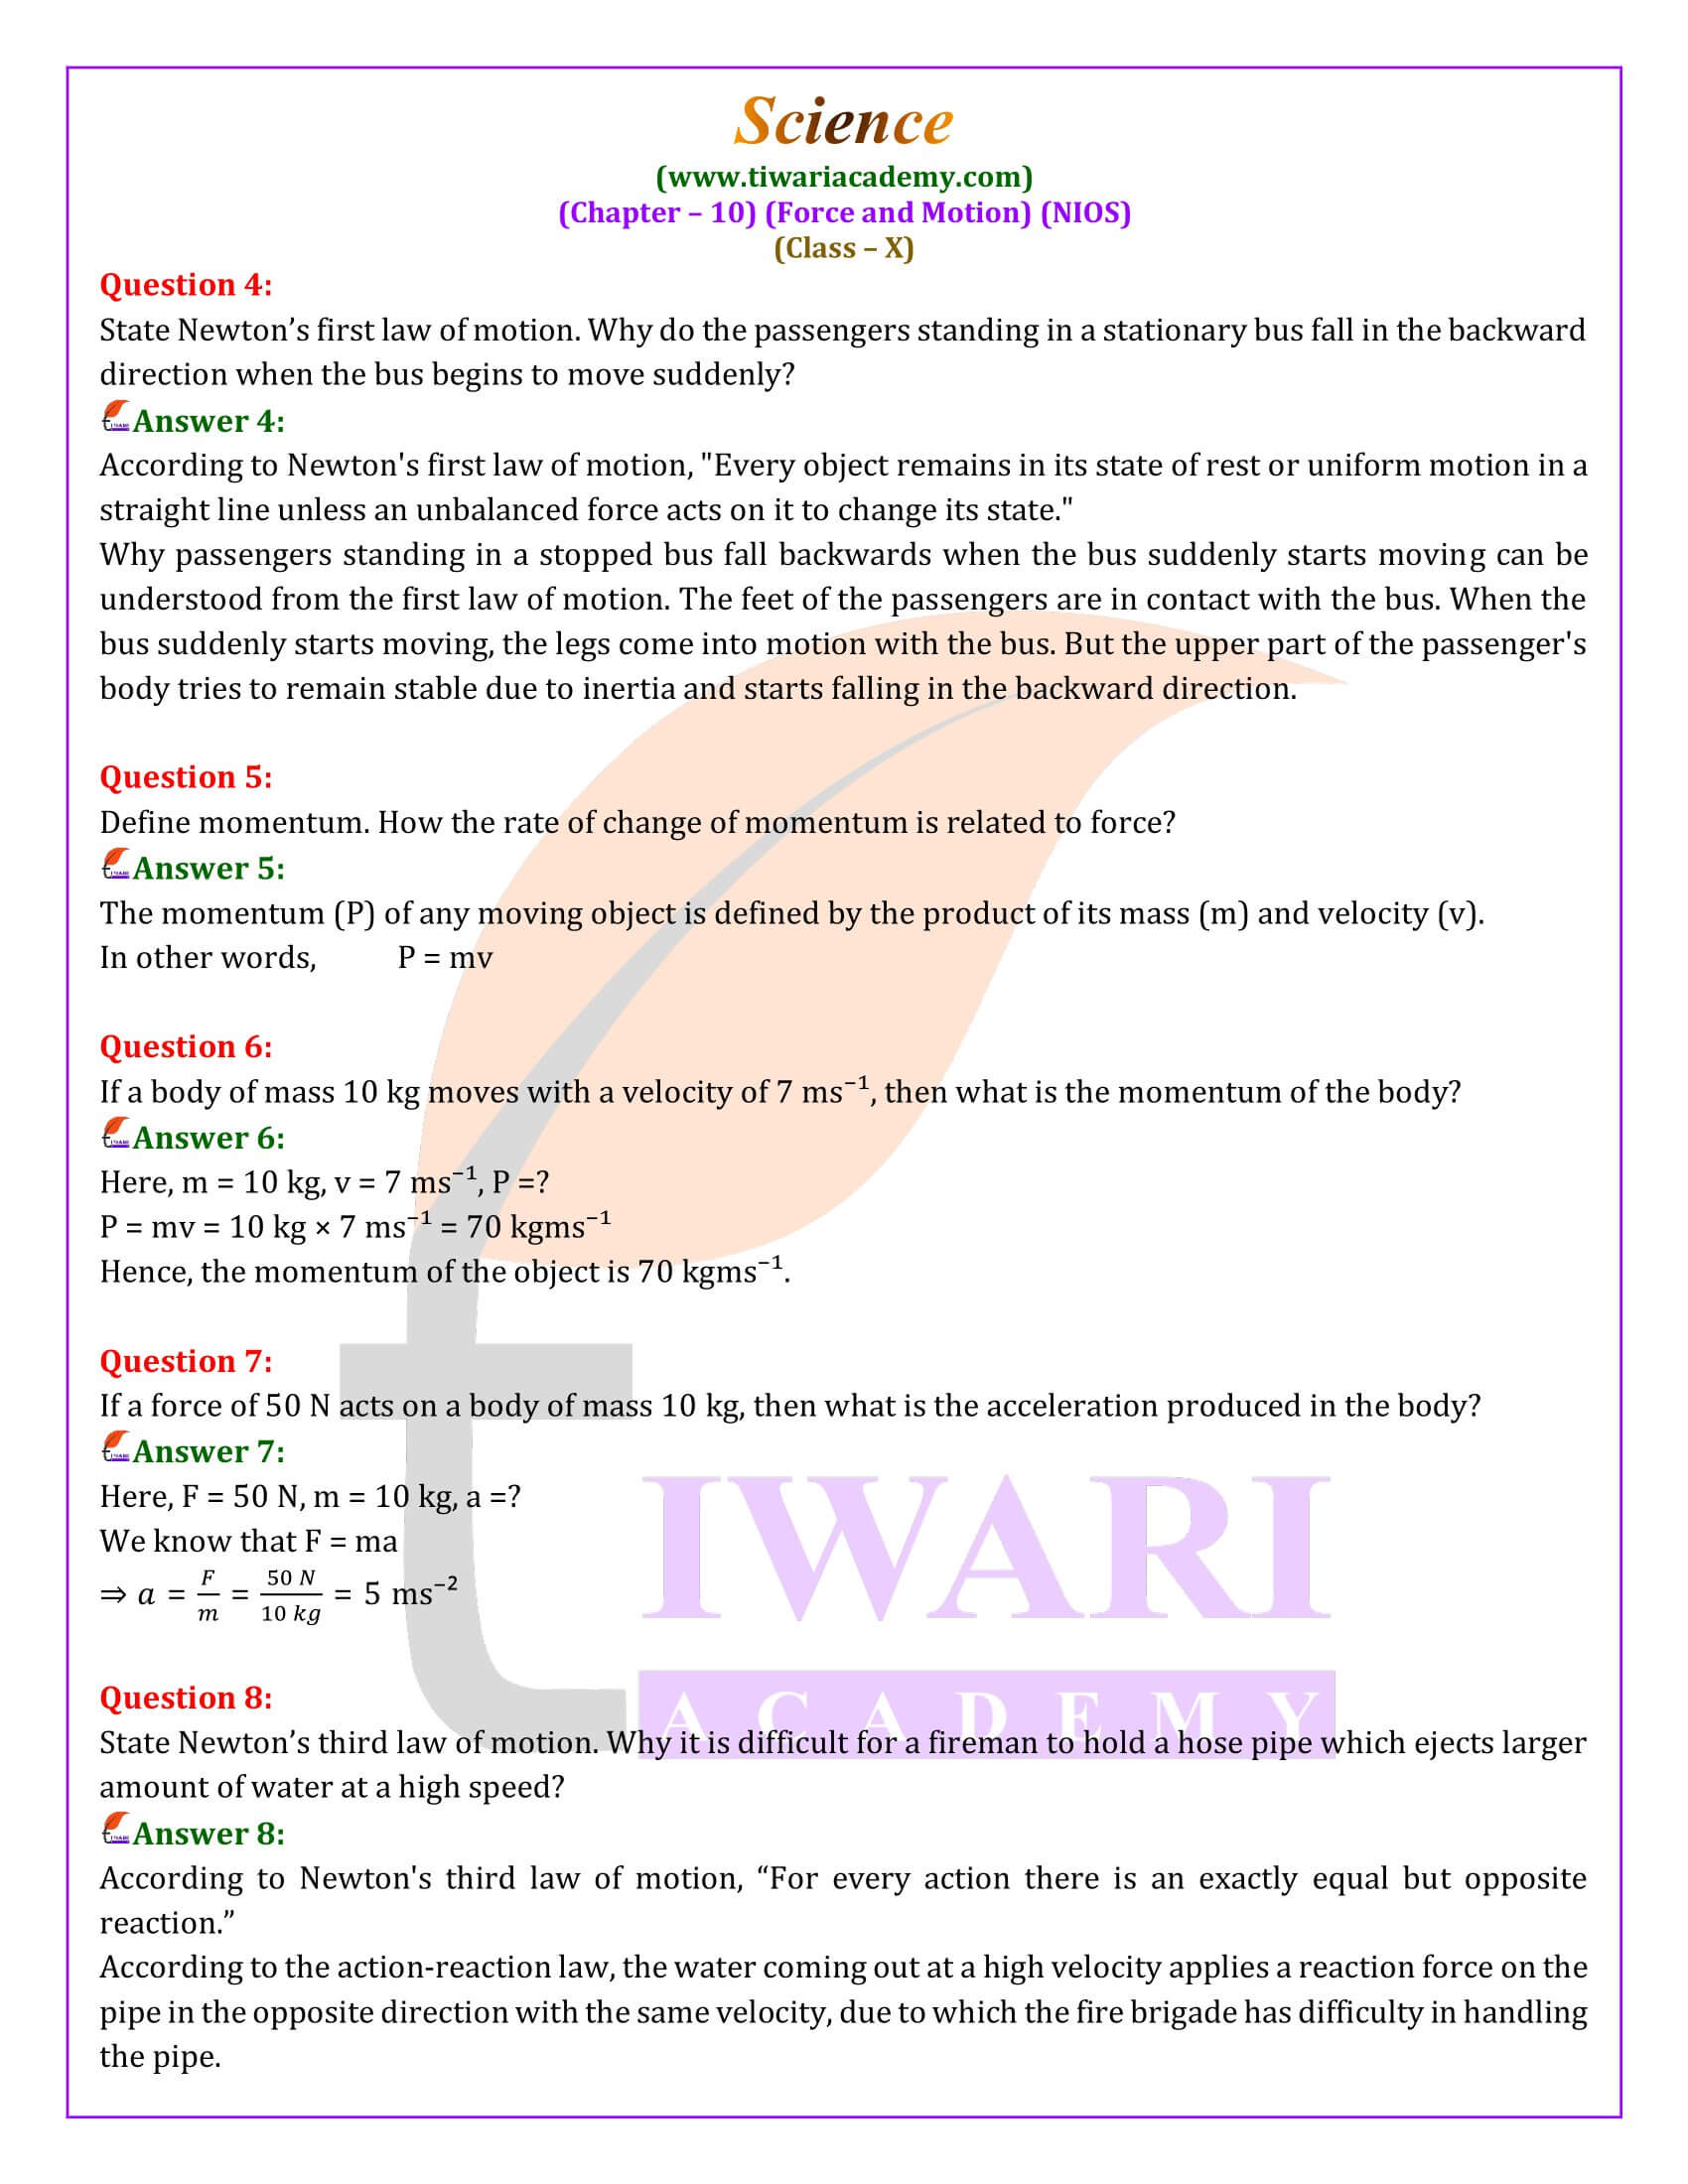 NIOS Class 10 Science Chapter 10 Question Answers